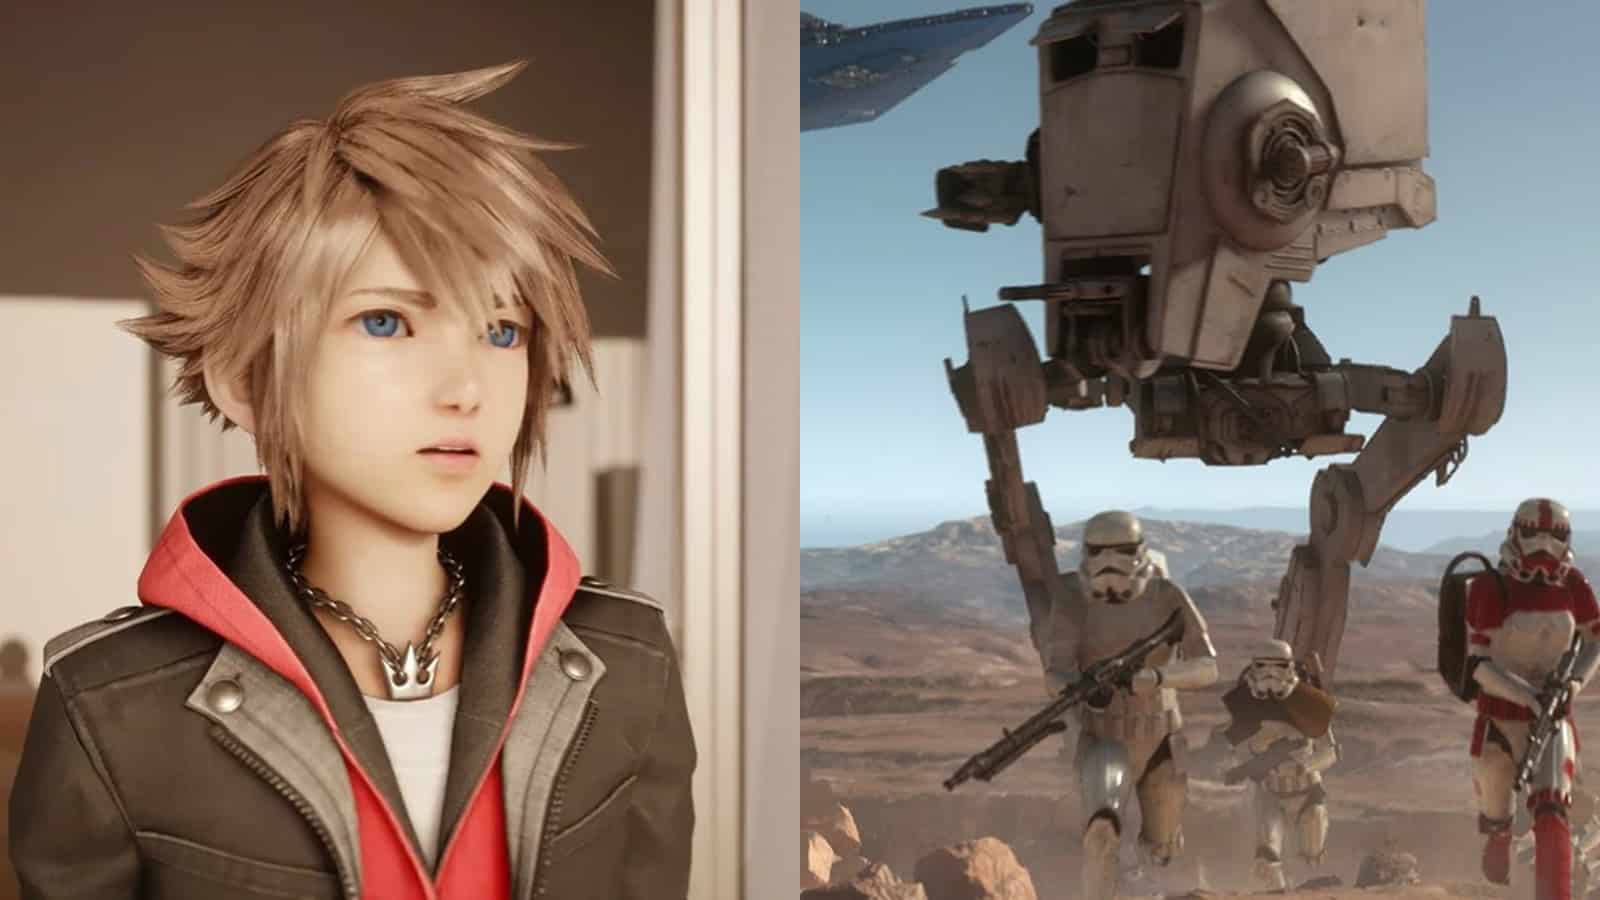 An image of Kingdom Hearts 4 and a At-St from star wars